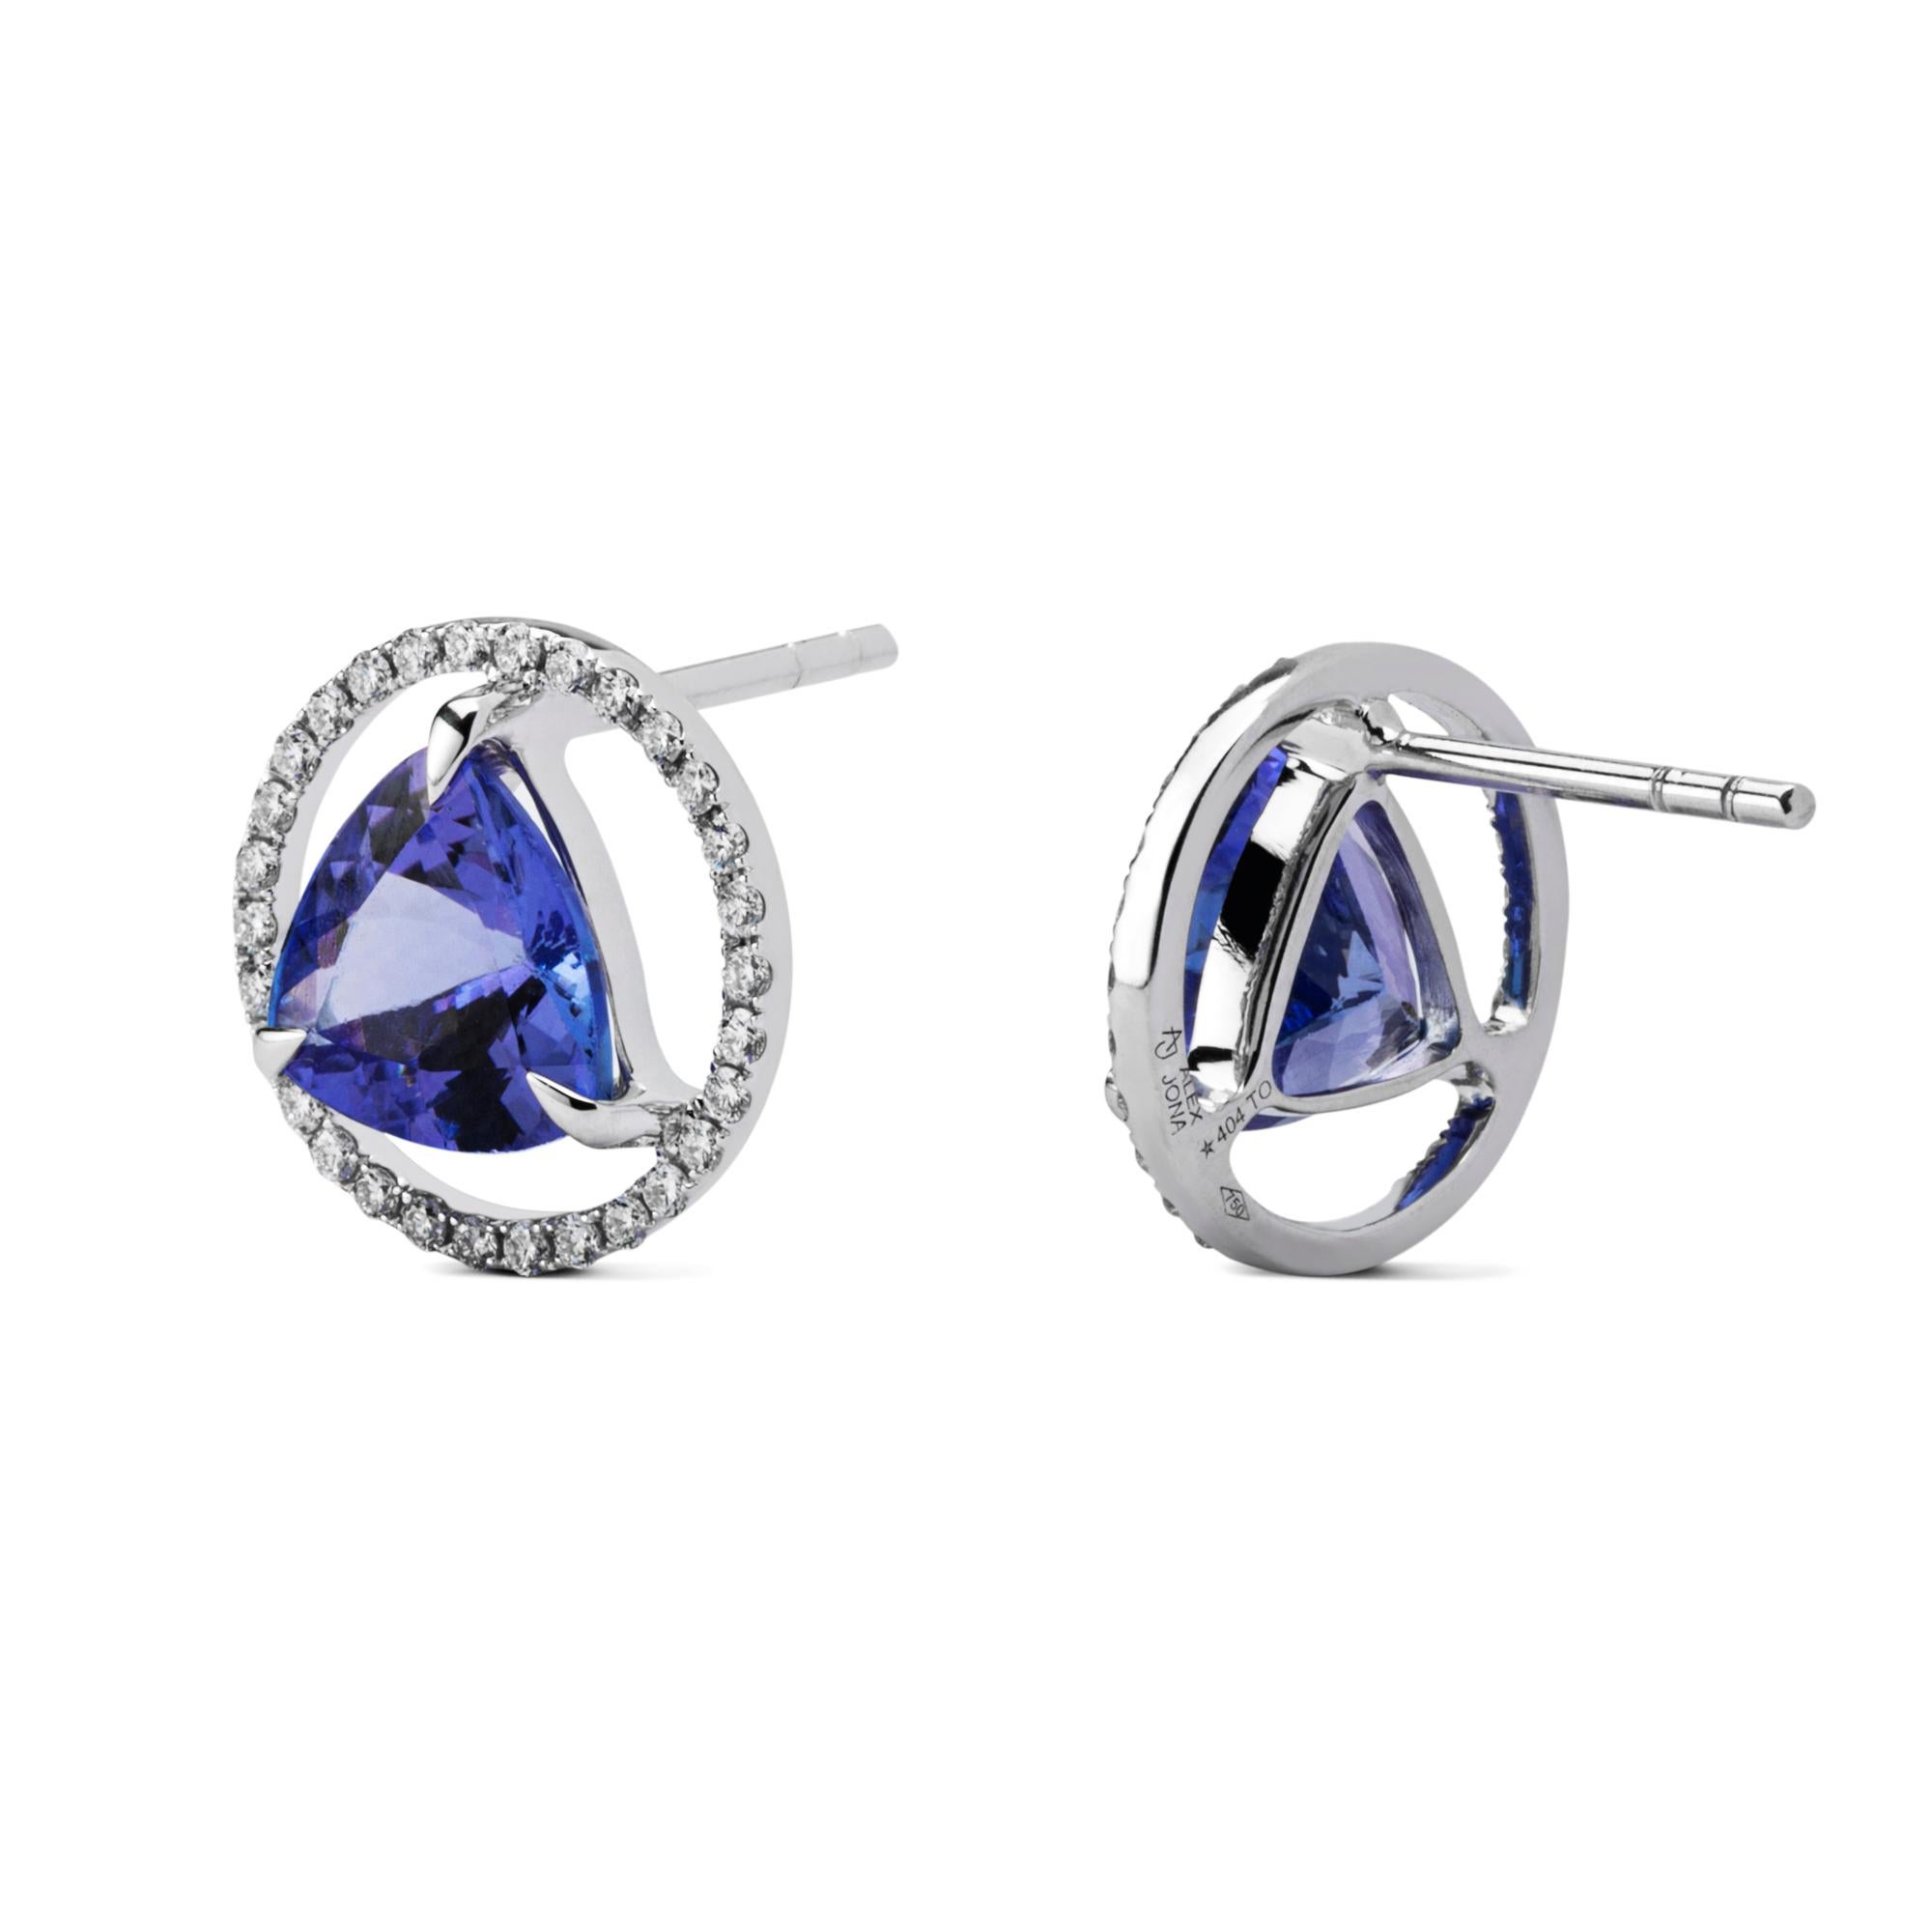 Alex Jona design collection, hand crafted in Italy, 18 karat white gold stud earrings set with two trillion cut Tanzanite weighing 3.94 carats, surrounded by 60 brilliant cut white diamonds, F color, VVS1 clarity, weighing 0.39 carats. Earrings